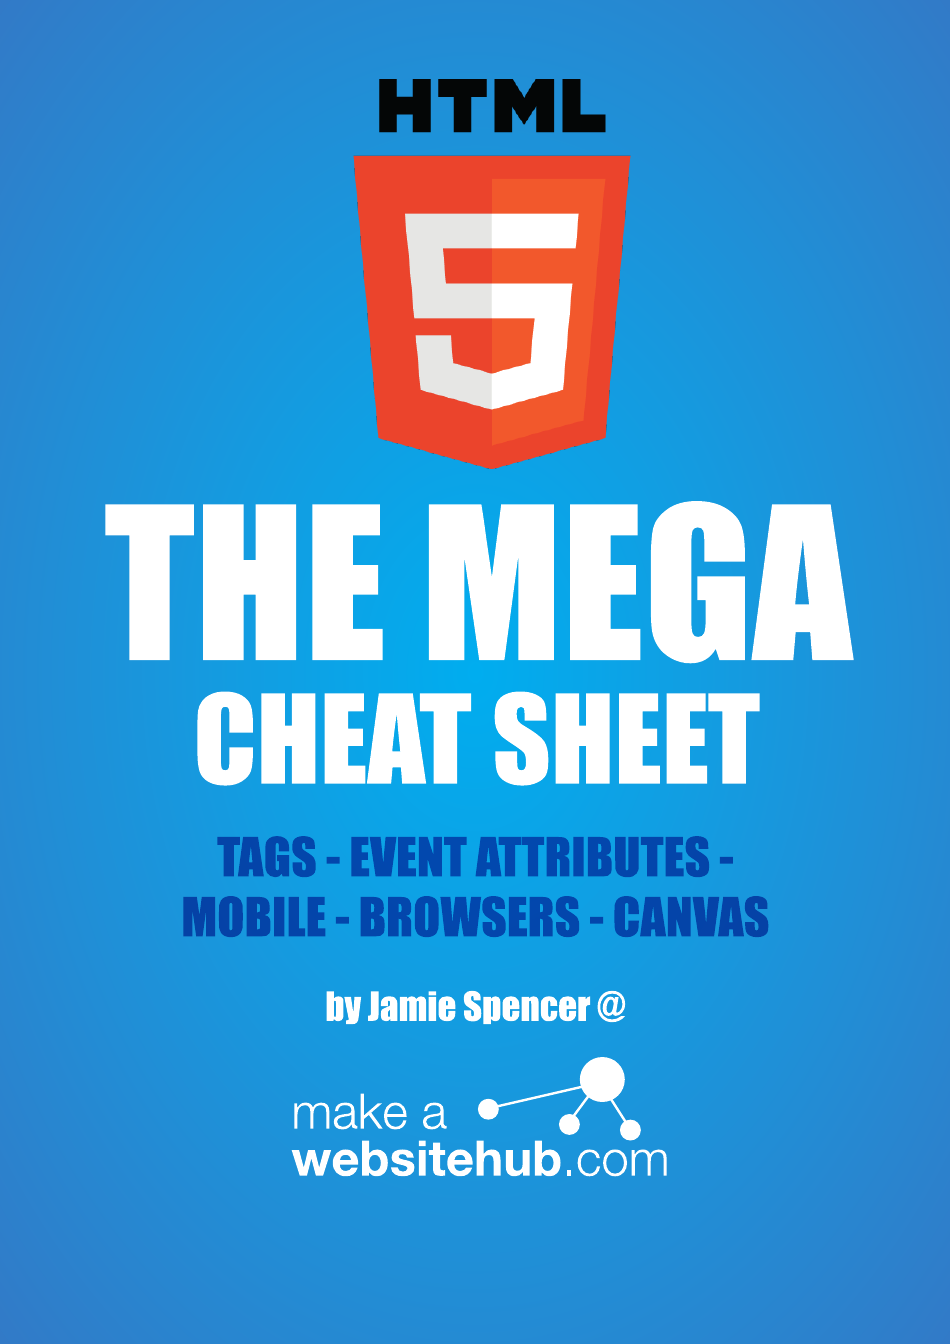 HTML5 Tags - A Comprehensive Cheat Sheet for HTML5 Tags